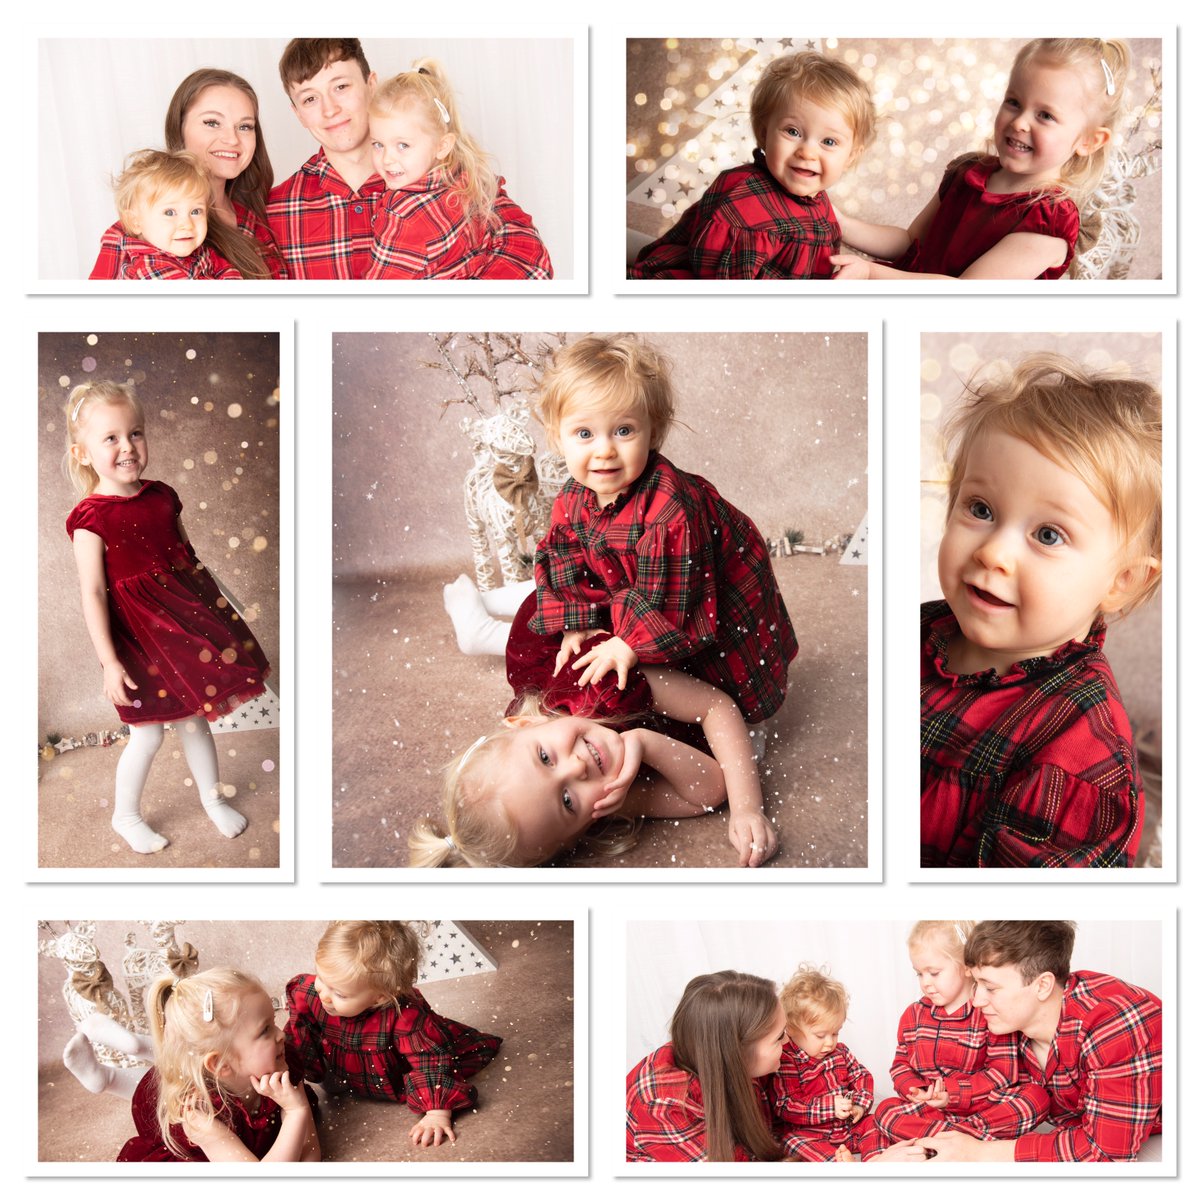 We love how this family brought matching pjs to their Christmas shoot back in December...

Book your family photoshoot today! olivetreestudios.co.uk/family

#christmas #familyphotoshoot #olivetreephotography #warringtonphotographer #warringtonstudio